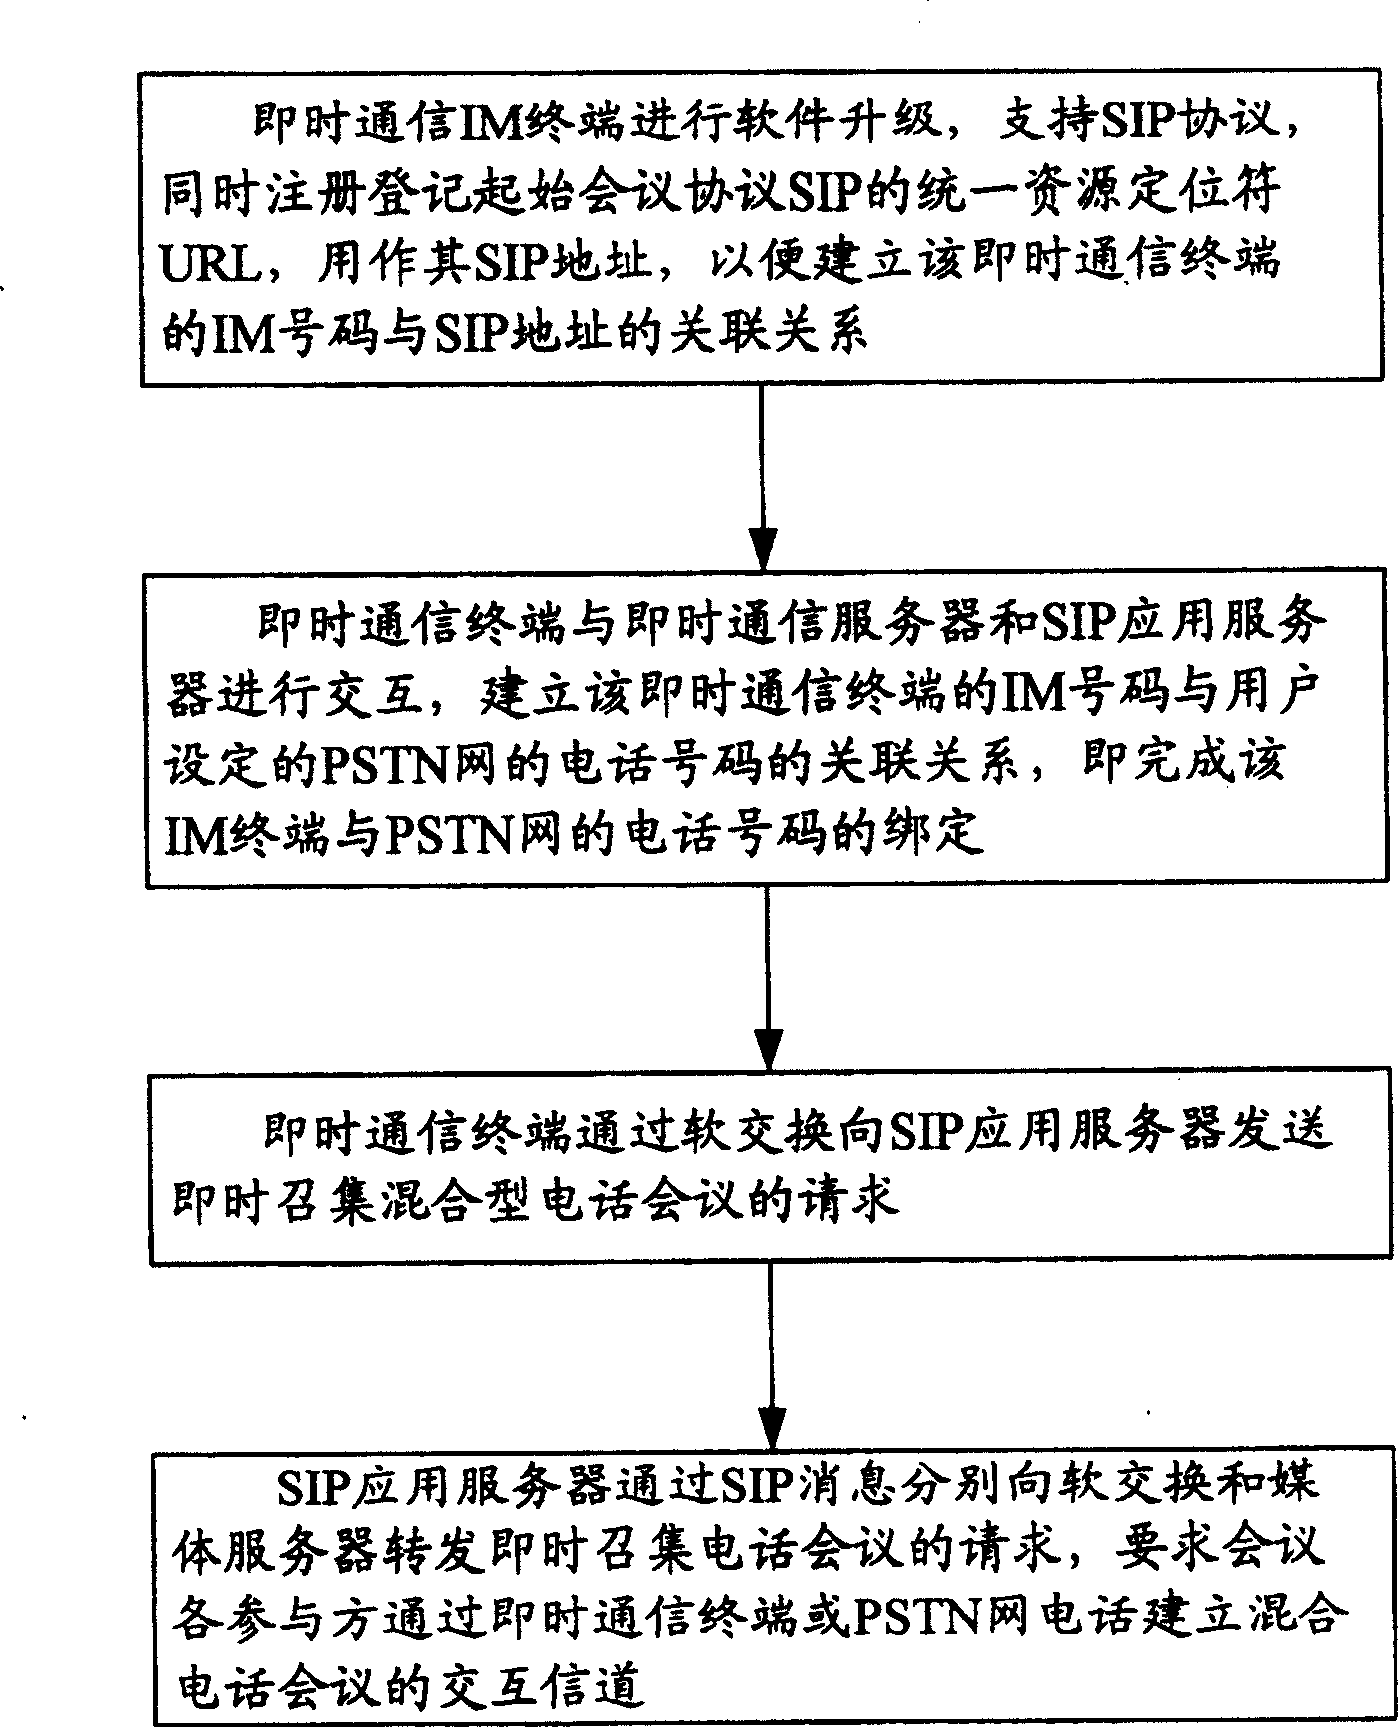 Control method for holding the mixed telephone conference with the instant communication device